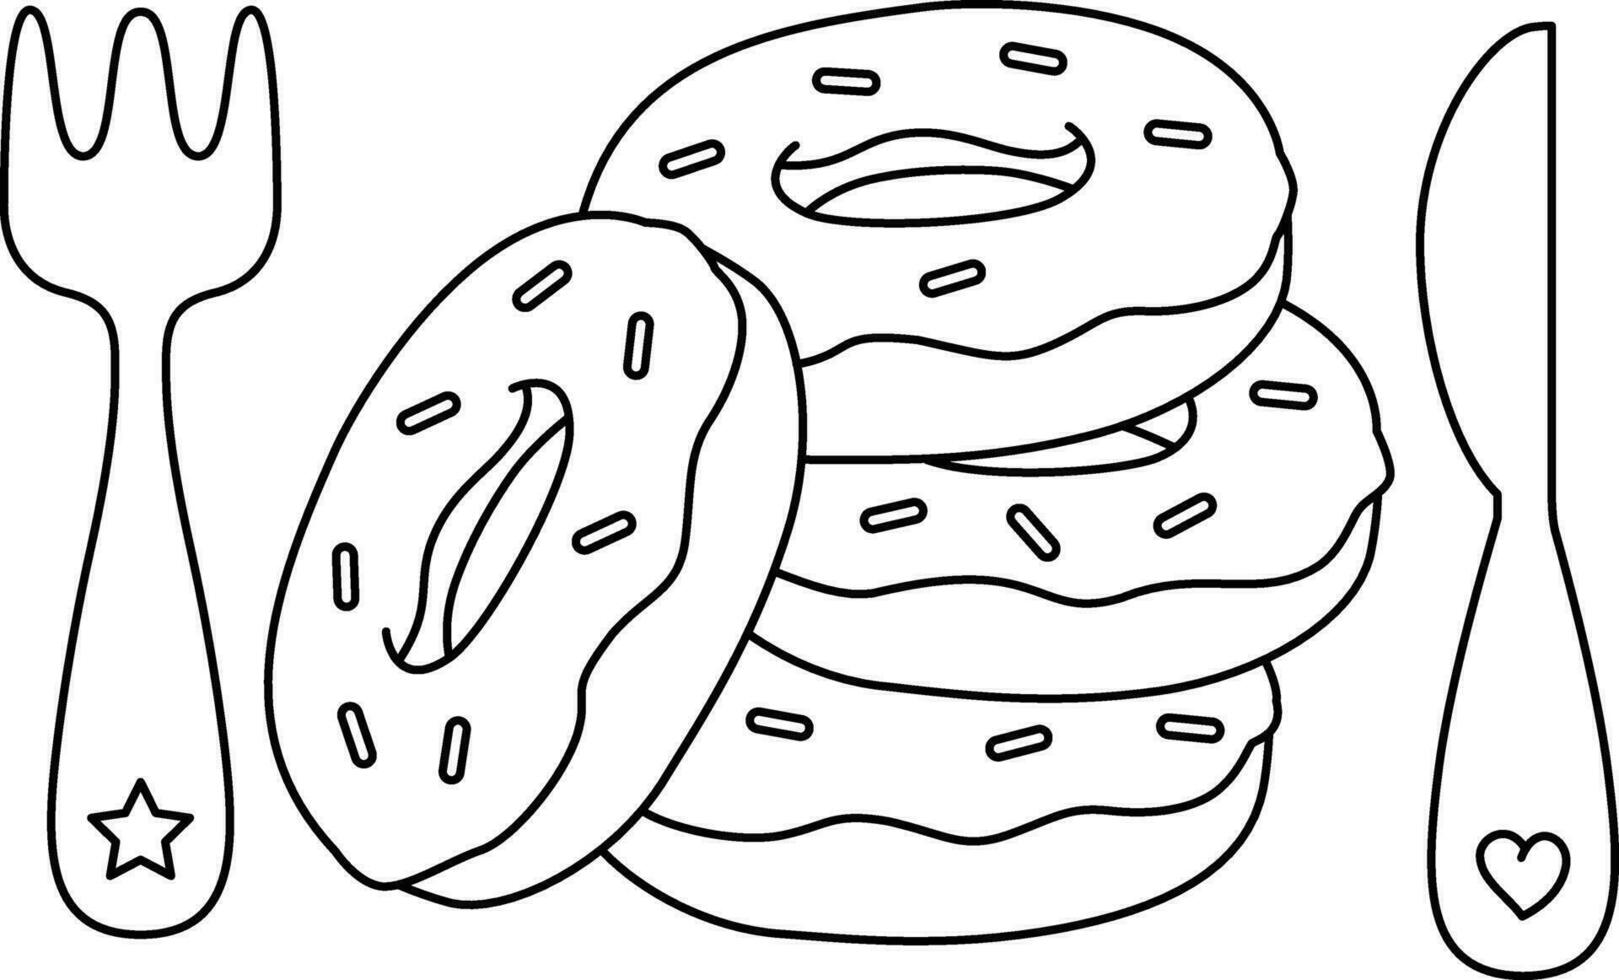 A stack of donuts, a knife, and a fork with black isolated line design vector